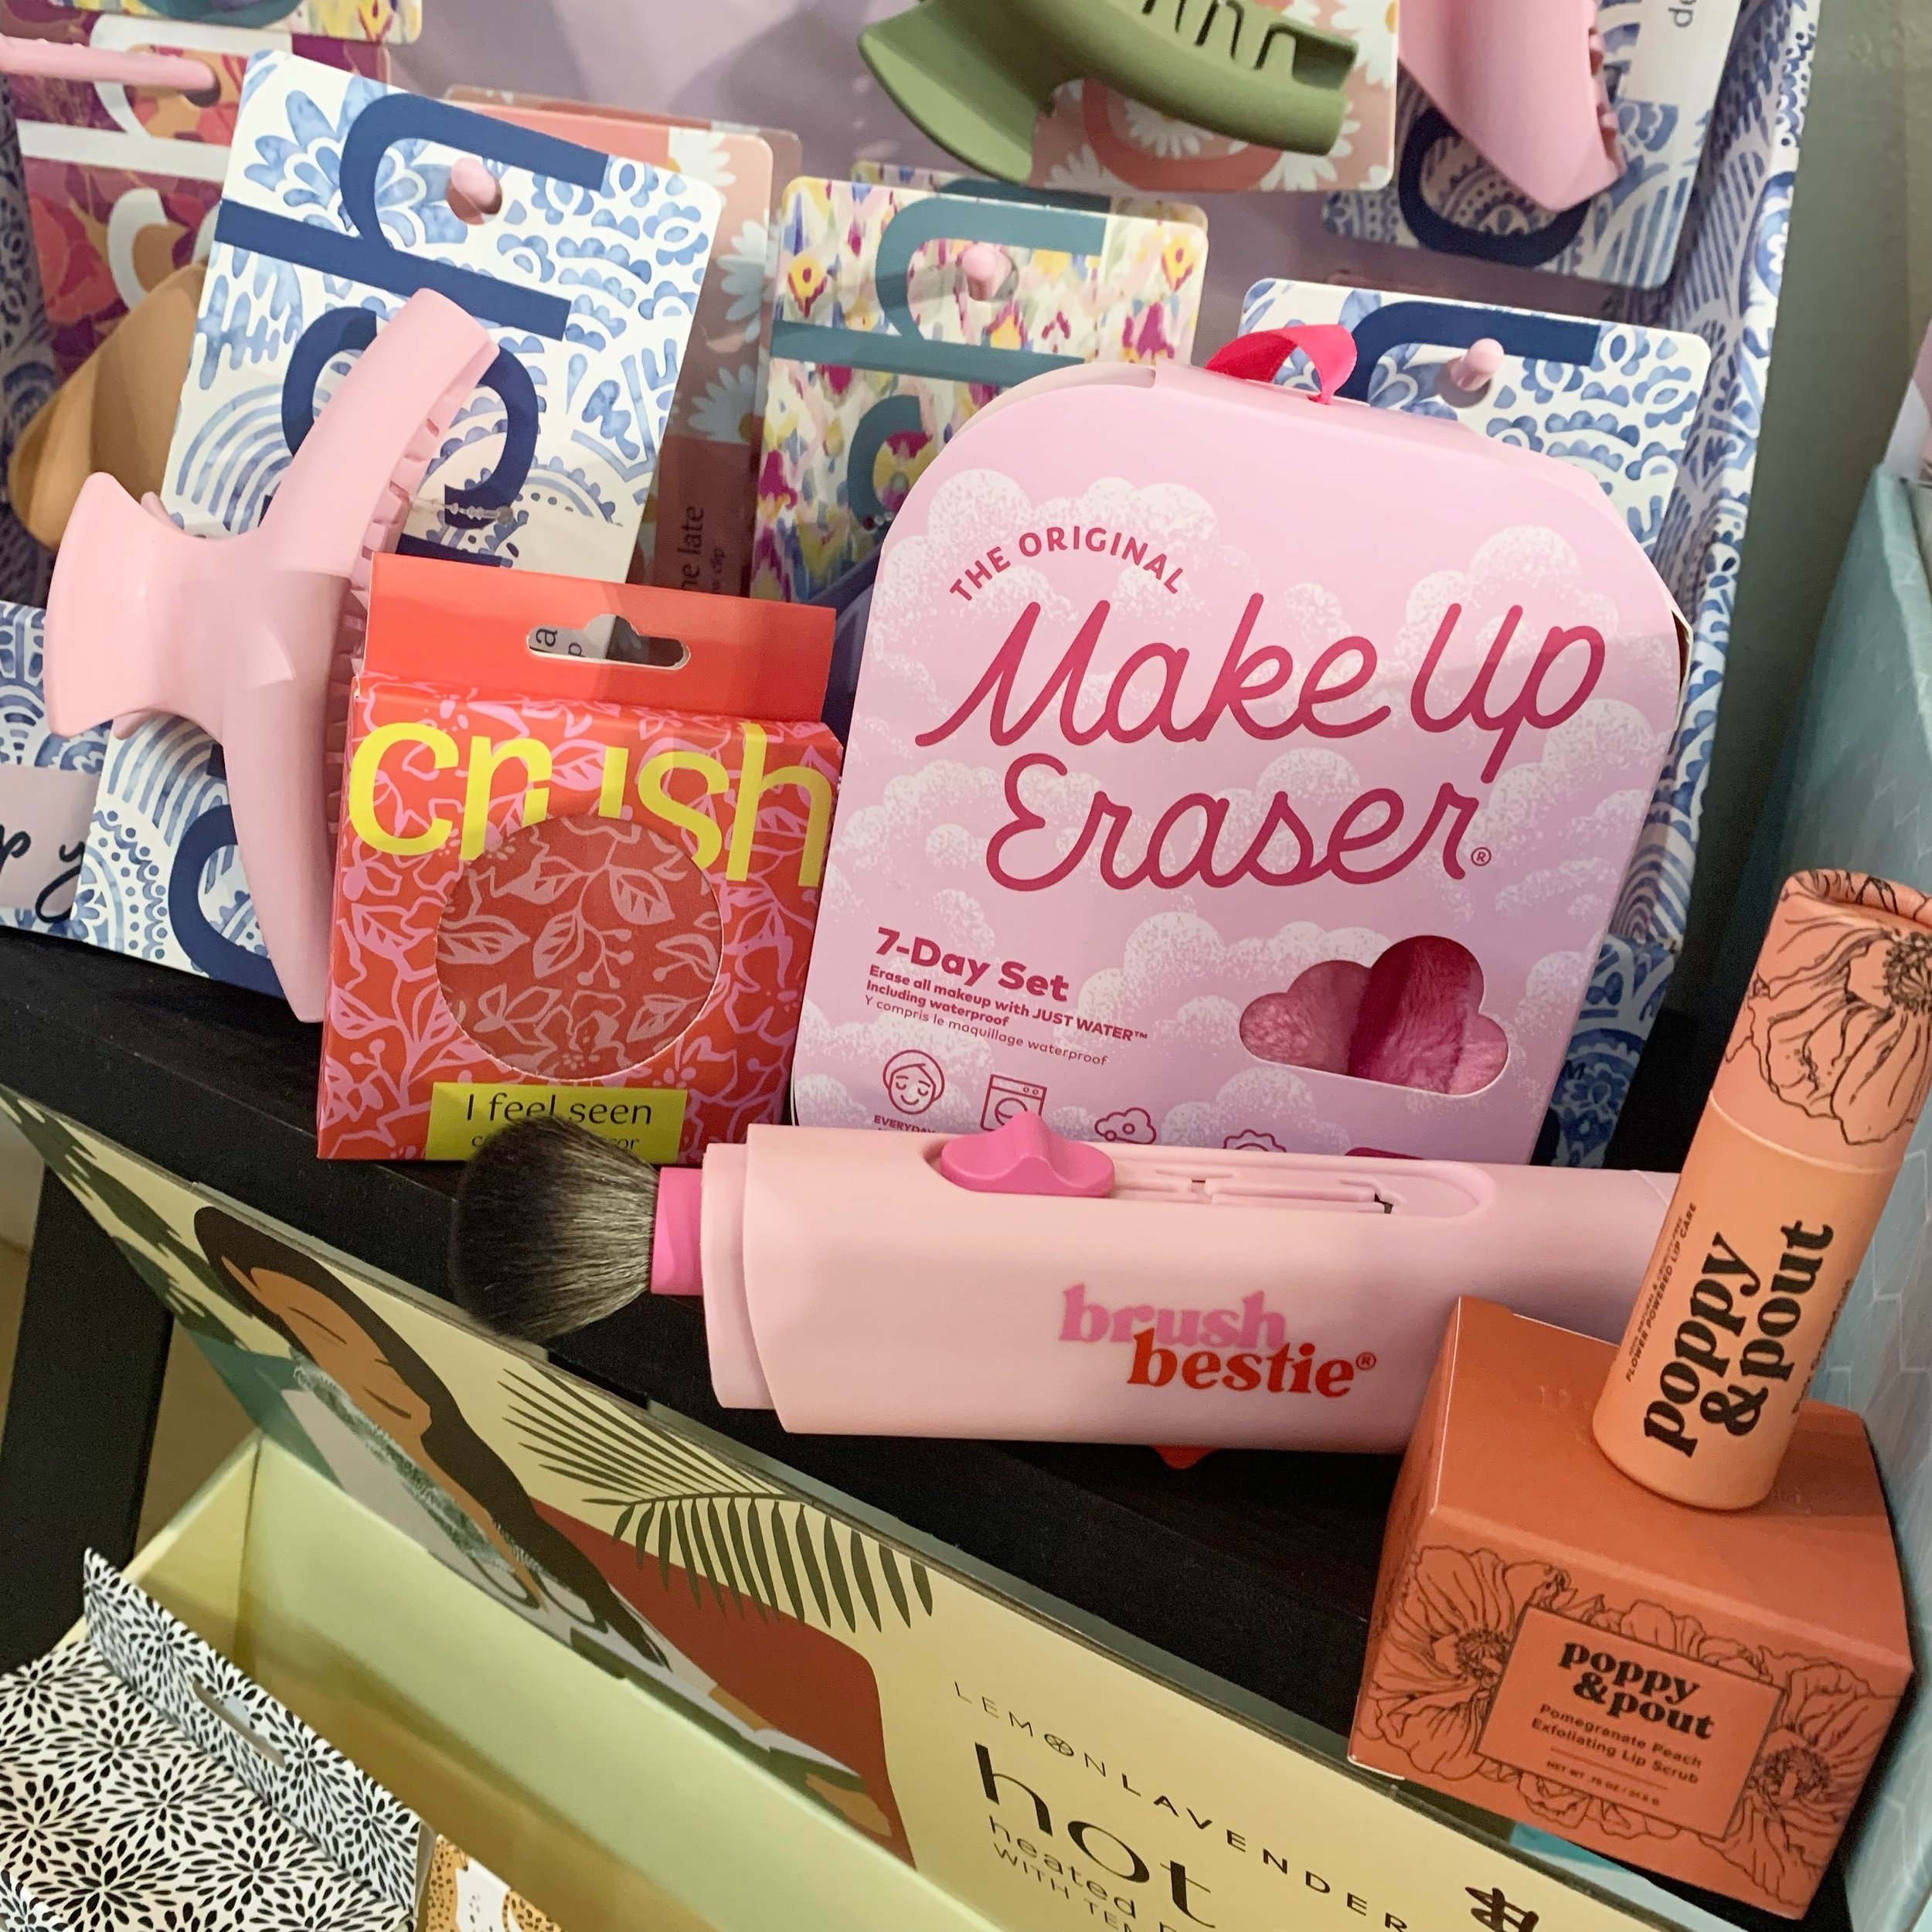 Here&rsquo;s a gift that pampers! 

Poppy and Pout lip scrub and lip balm
Makeup Eraser 7 day set
Crush compact mirror 
Crush claw clip 
Brush Bestie (4 makeup brushes in one!)